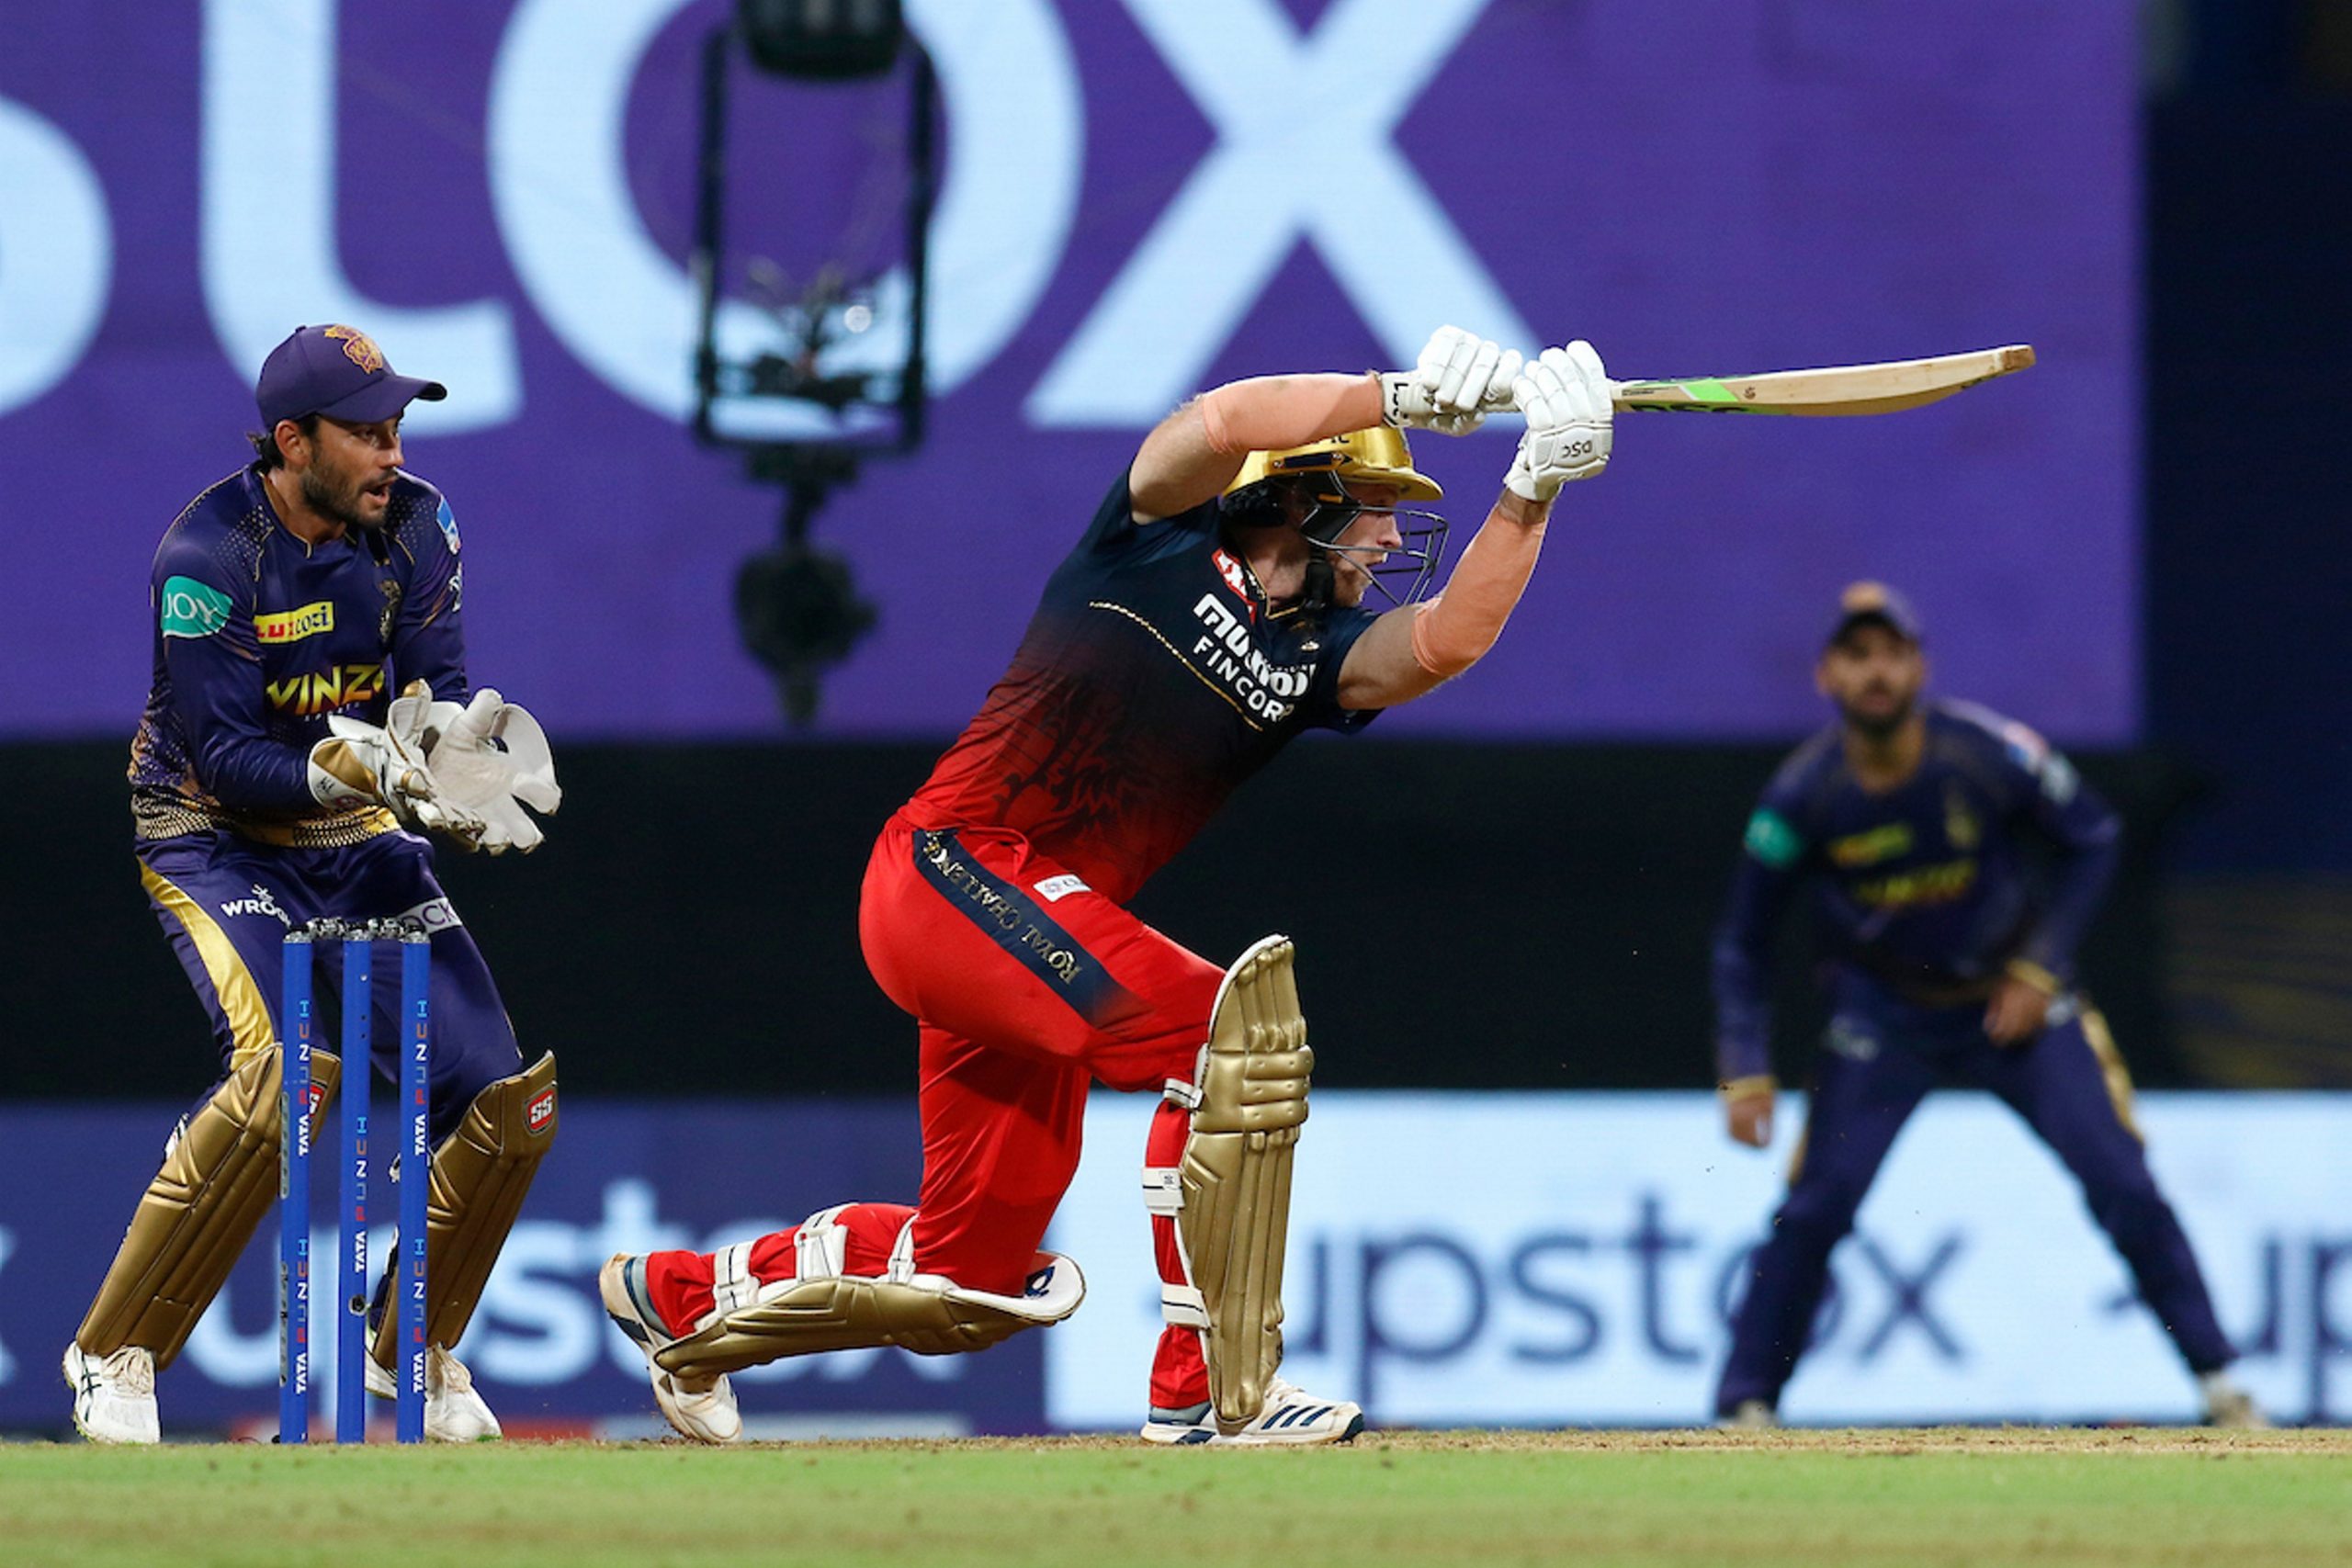 RCB scrape first win of IPL 2022, defeat KKR by 3 wickets